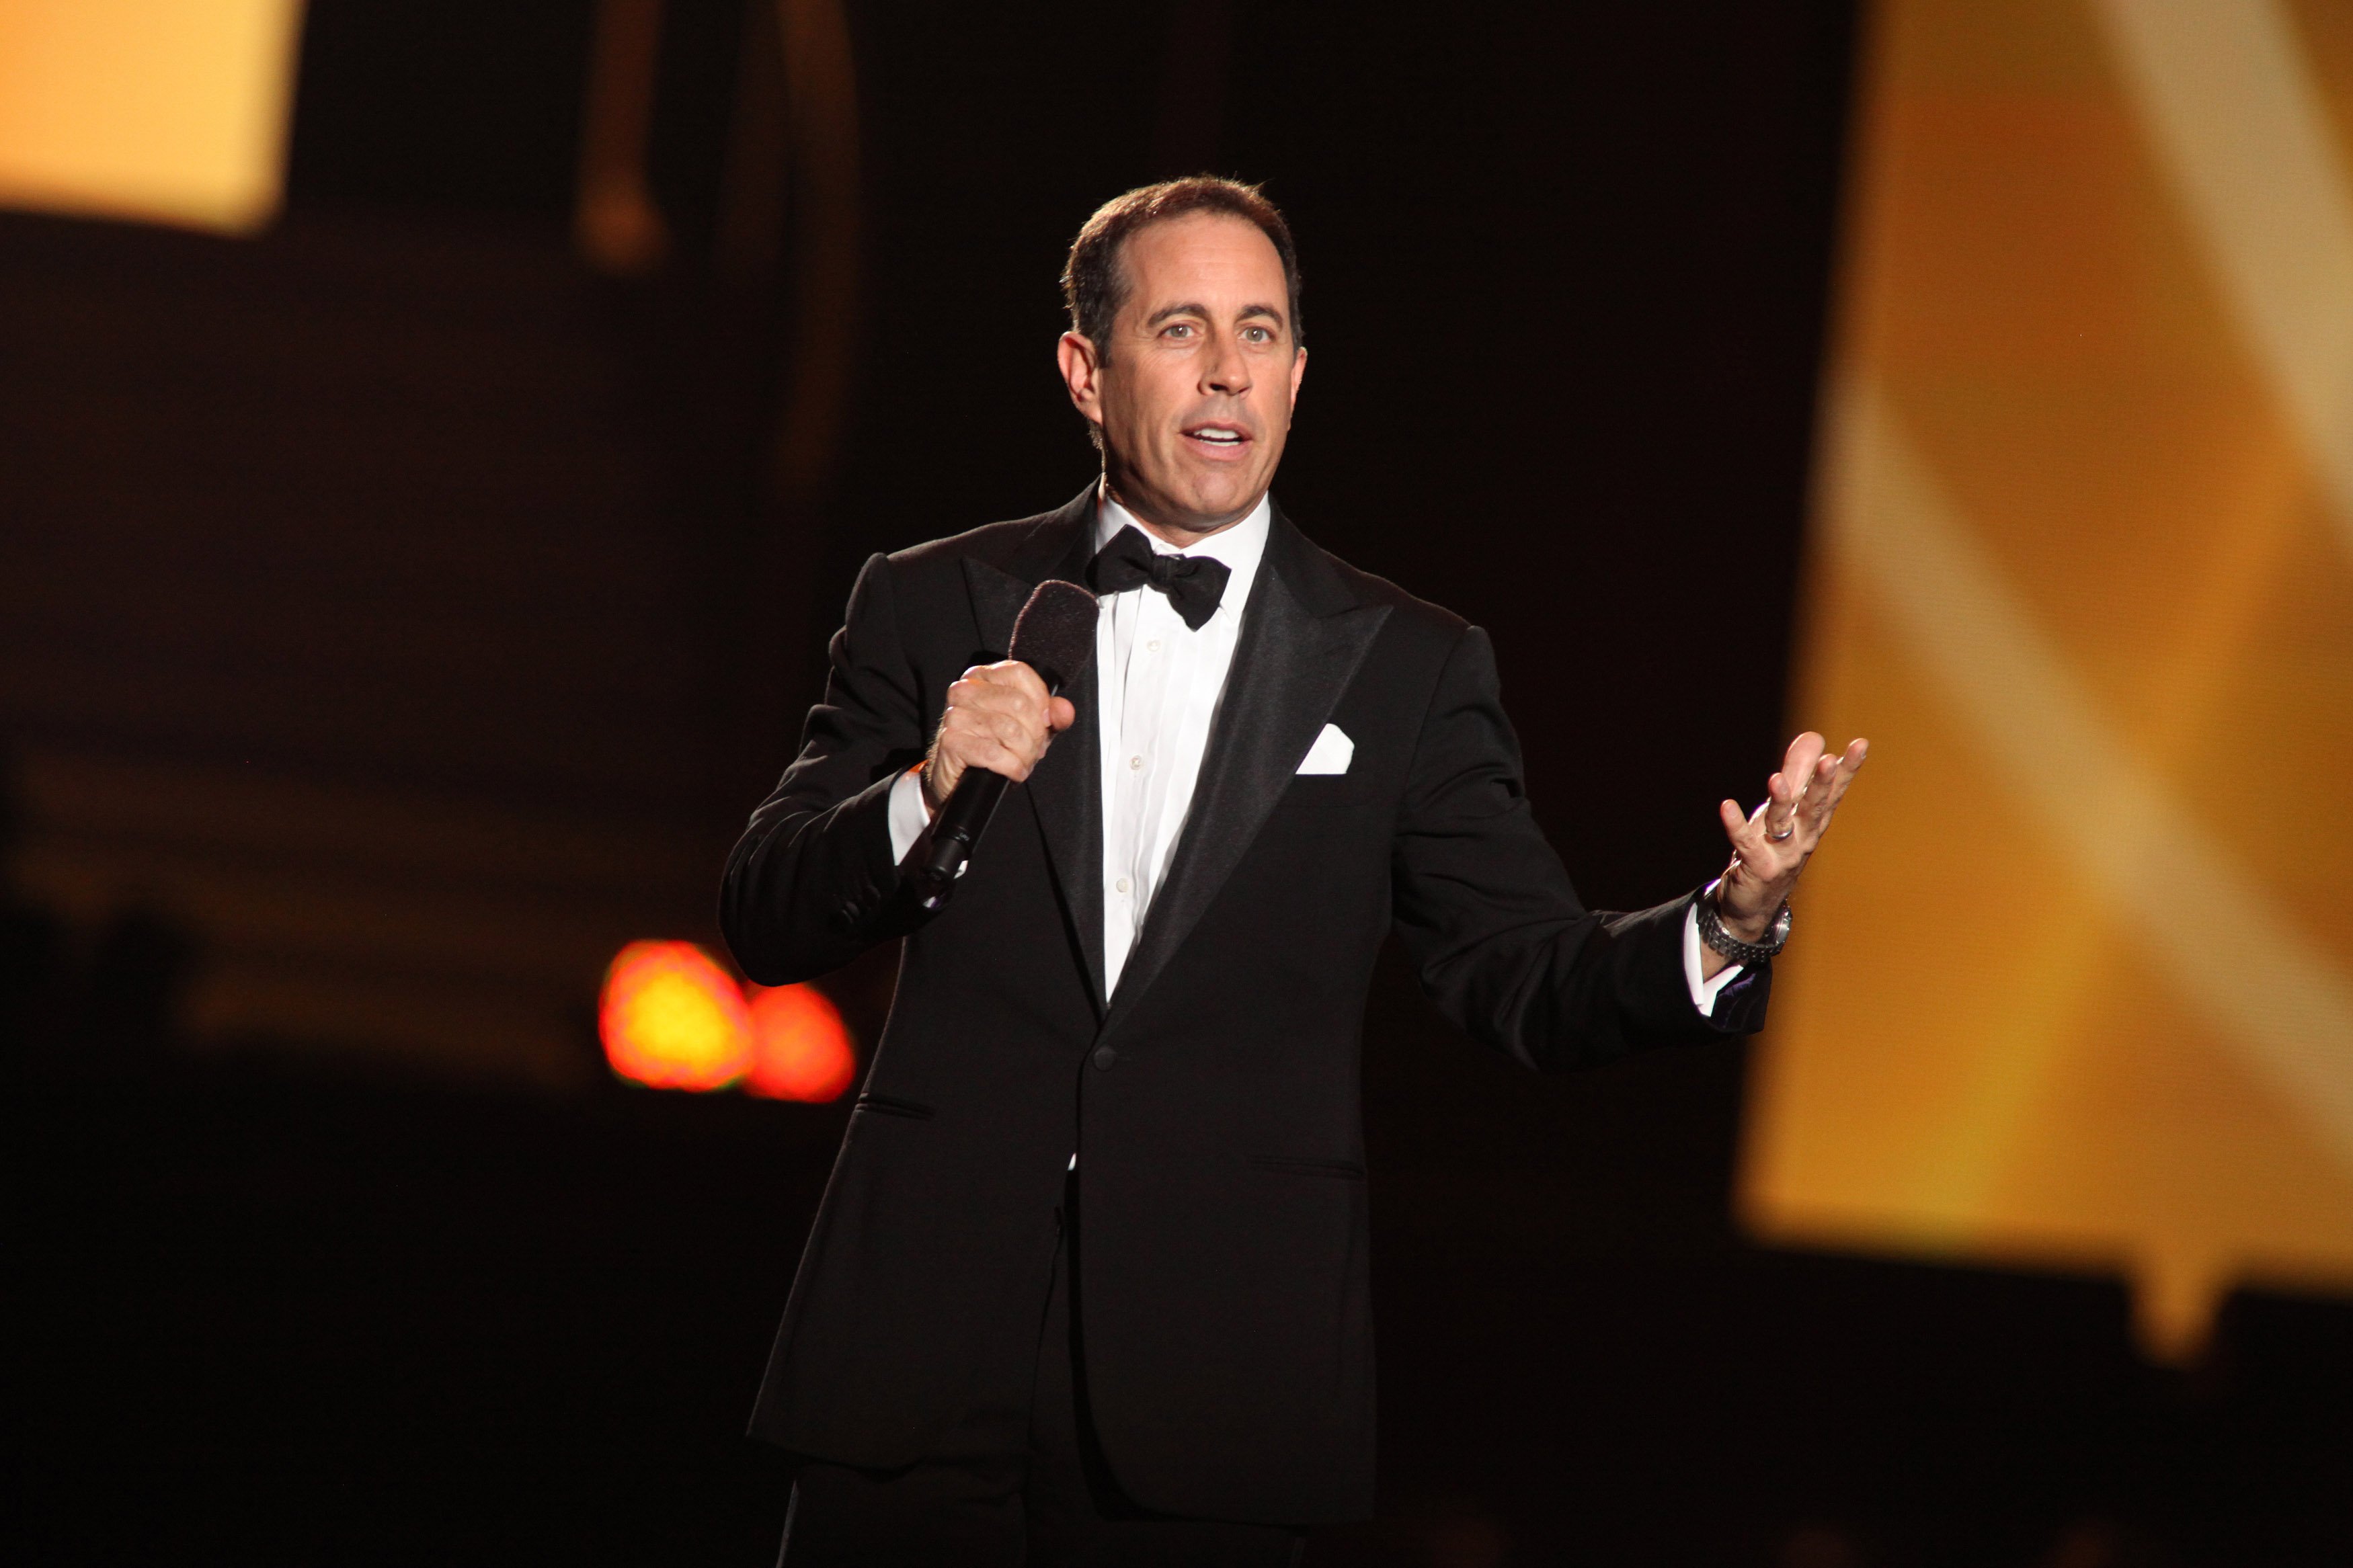 Jerry Seinfeld attends 'Surprise Oprah! A Farewell Spectacular' at the United Center on May 17, 2011